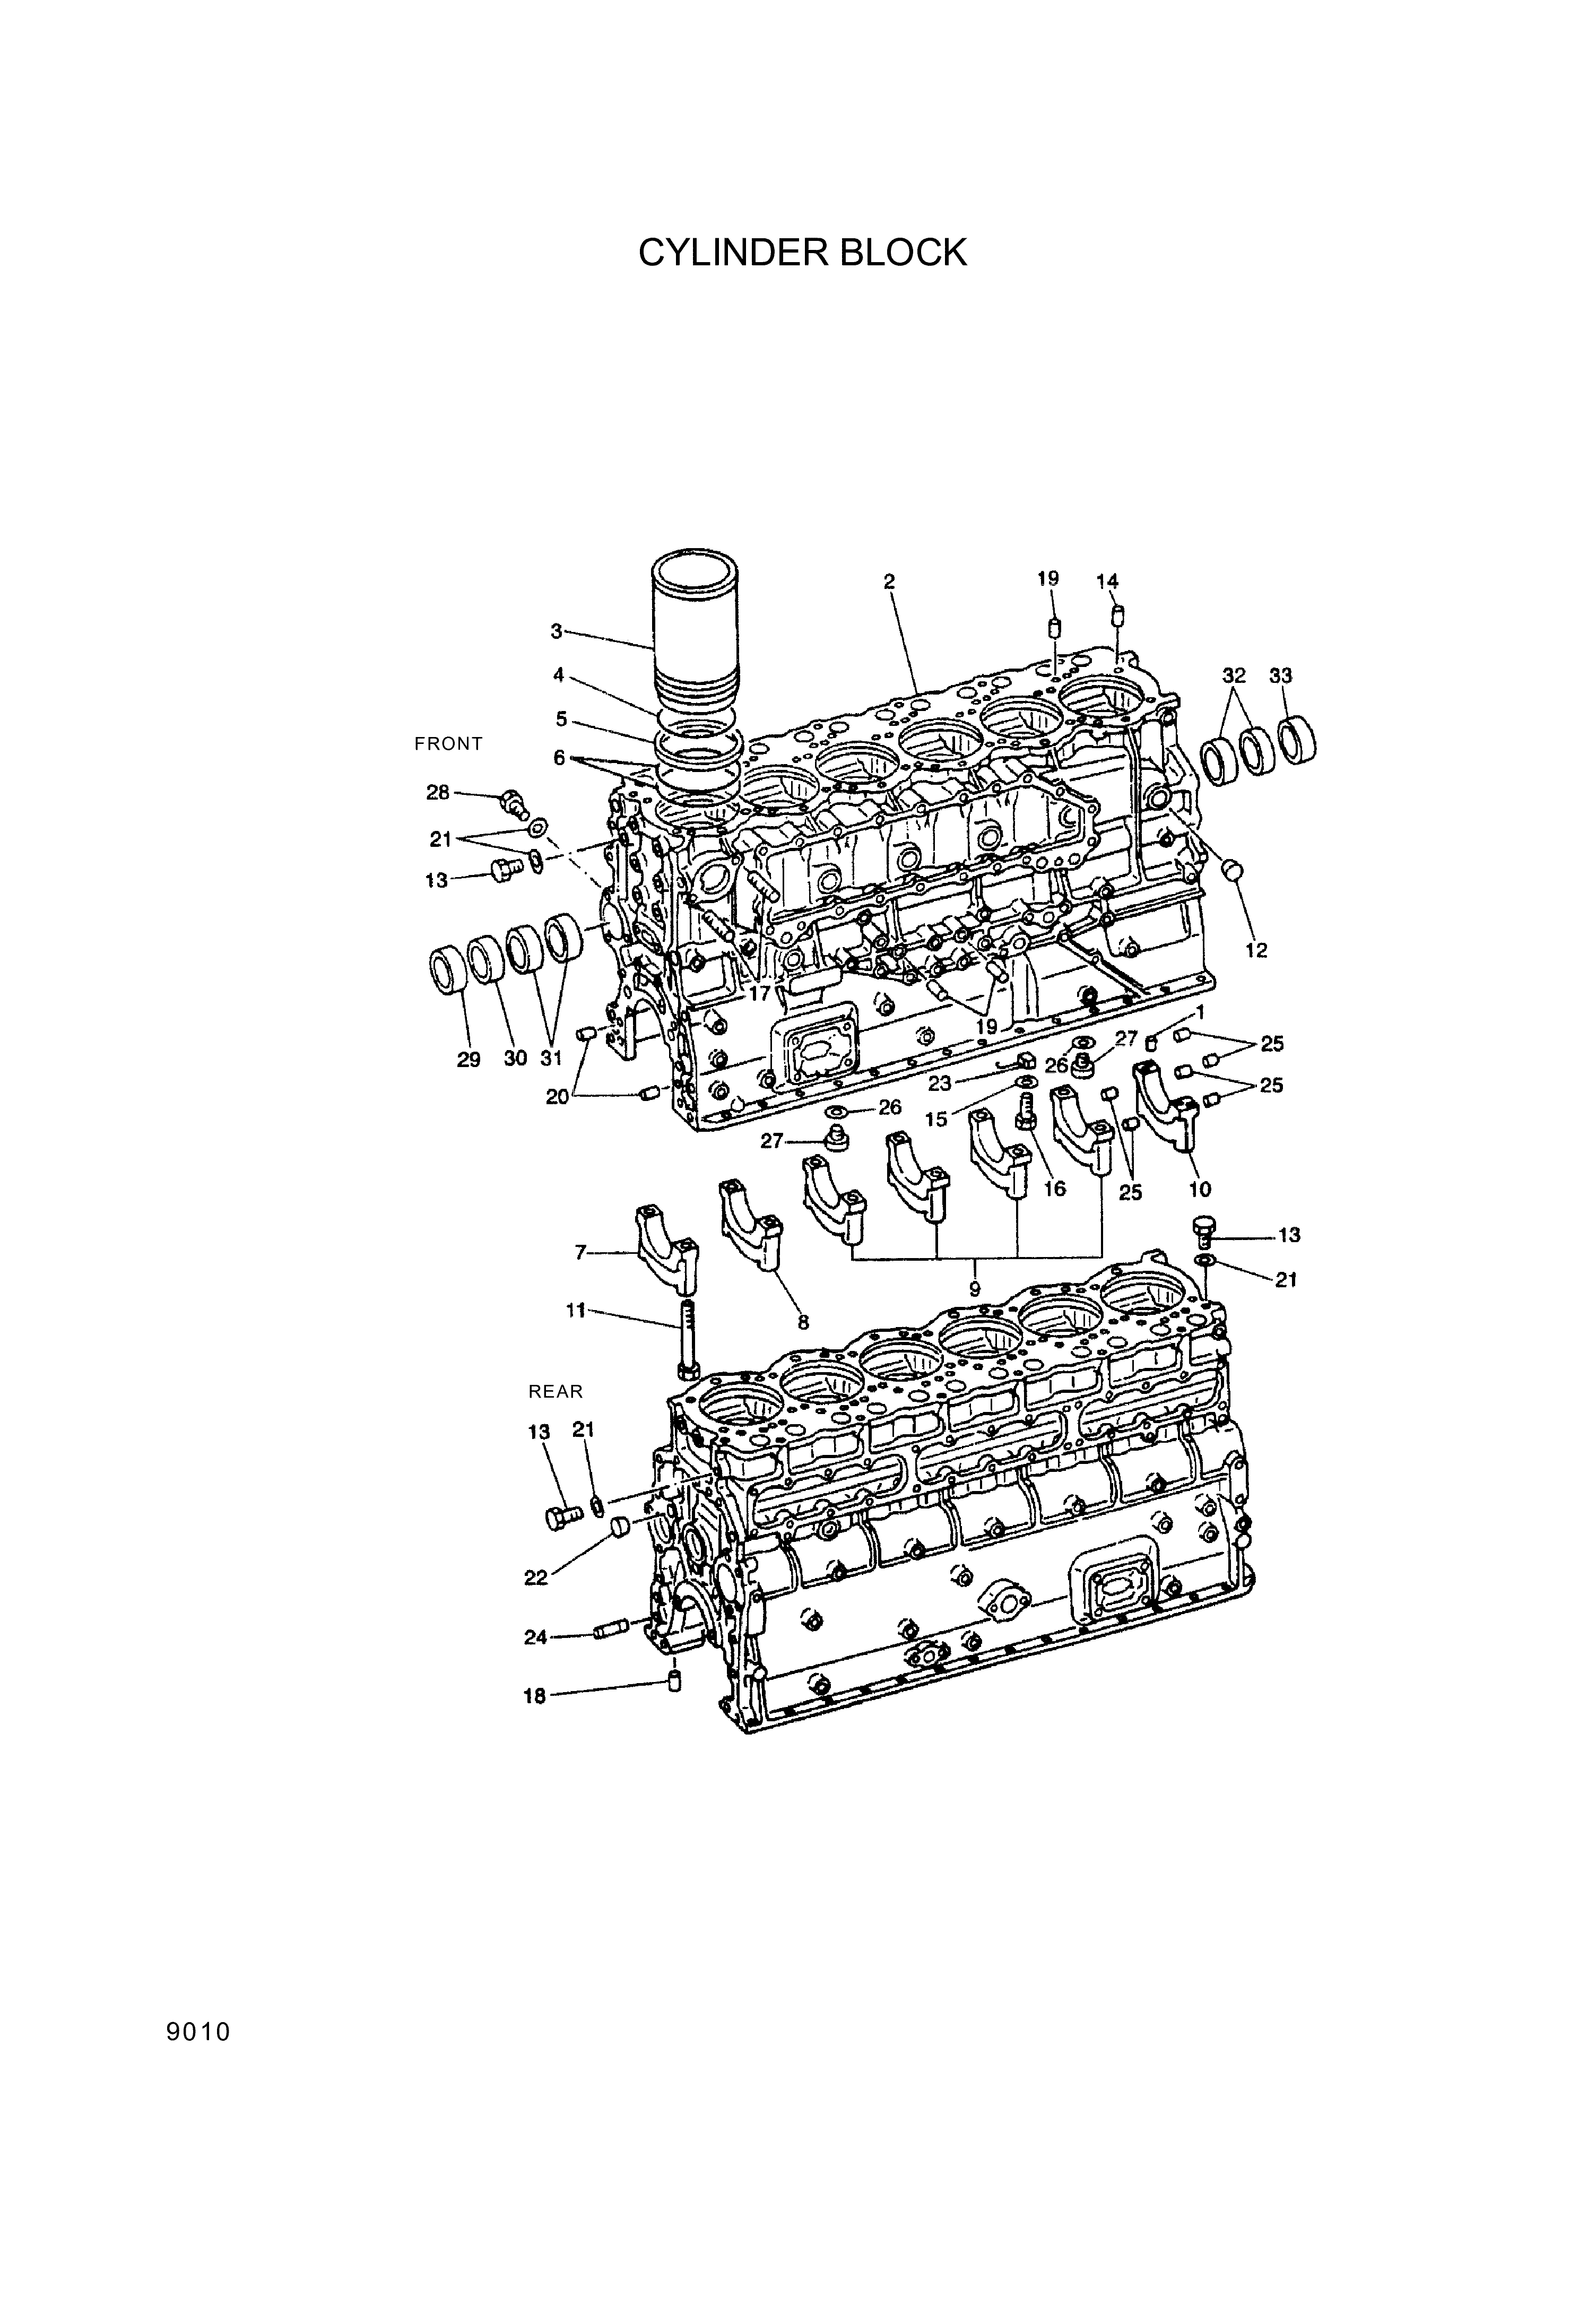 drawing for Hyundai Construction Equipment S21100-83000 - CYL BLOCK (figure 1)